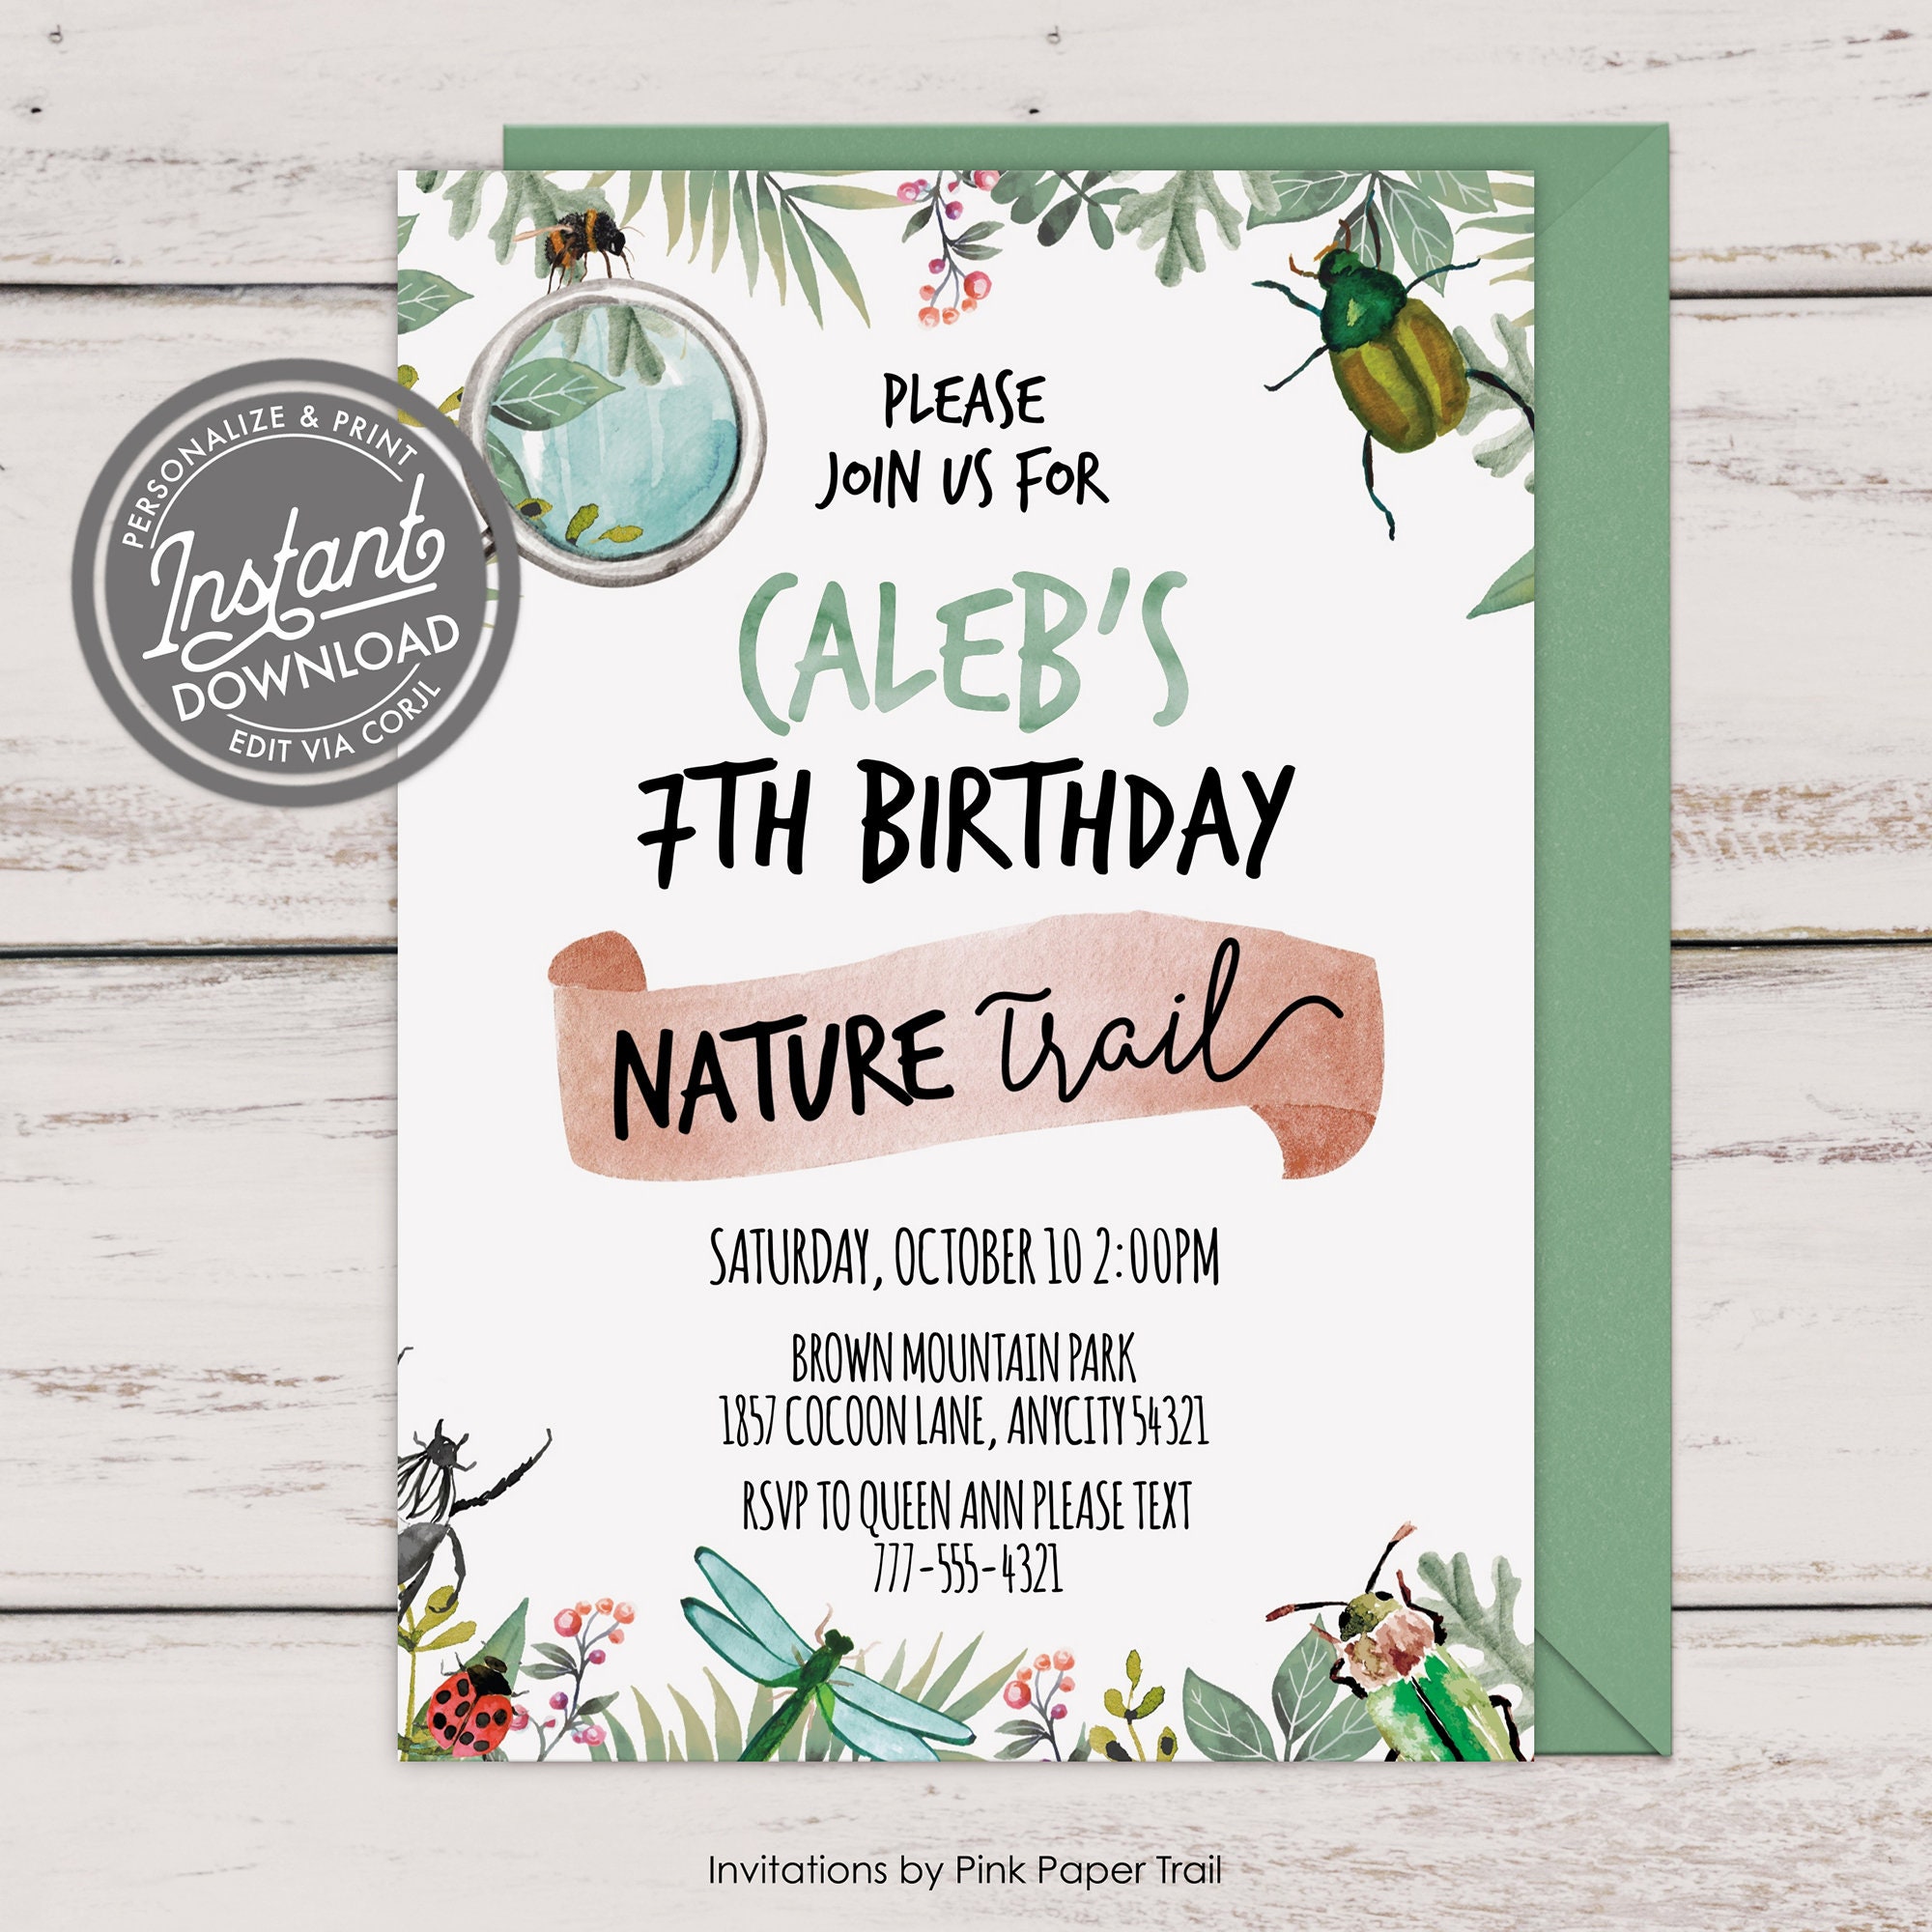 Ultimate Pirate Birthday Party Ideas For Little Explorer  Download  Hundreds FREE PRINTABLE Birthday Invitation Templates